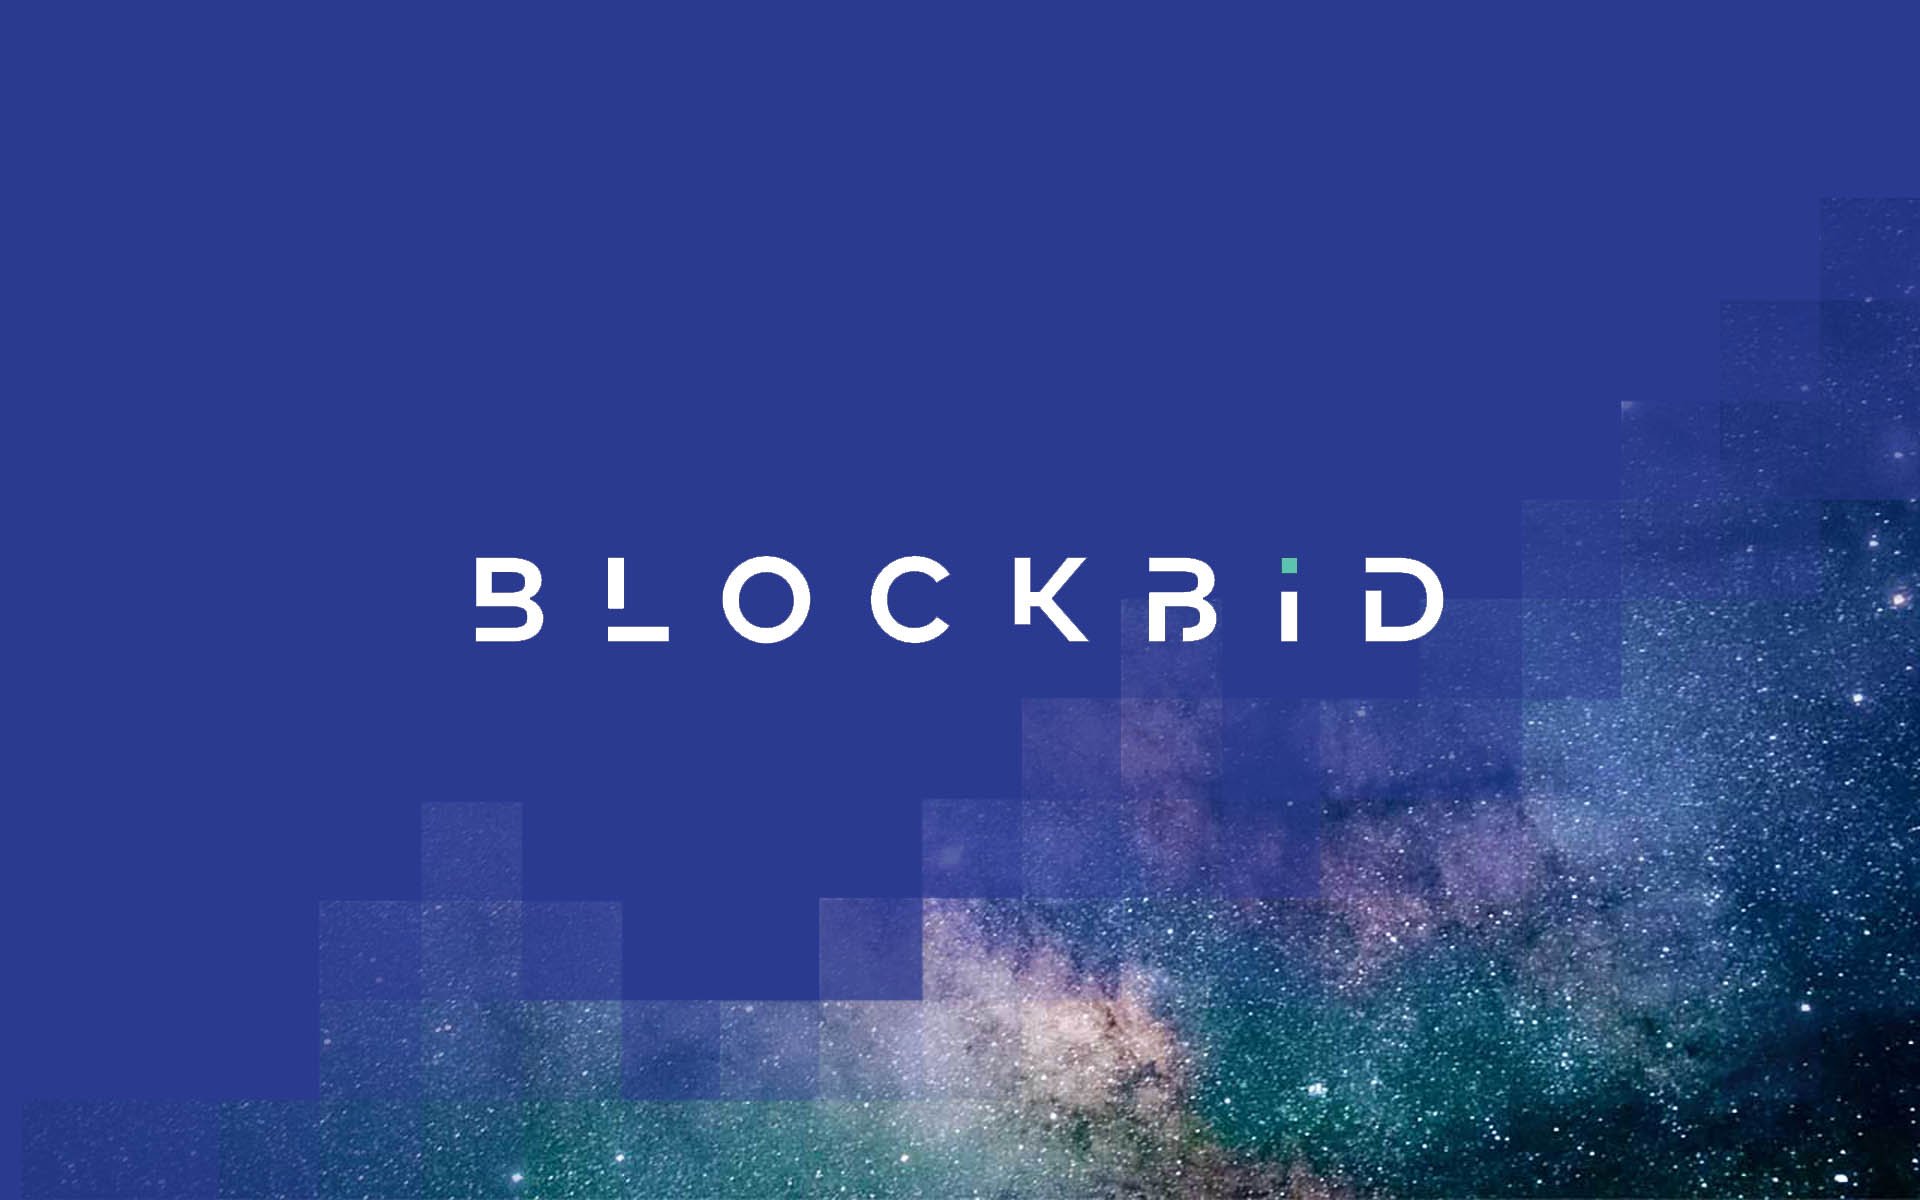 Australian Cryptocurrency Exchange Blockbid Announces Beta Launch and Coin Listings with Fiat Trading Following Successful ICO